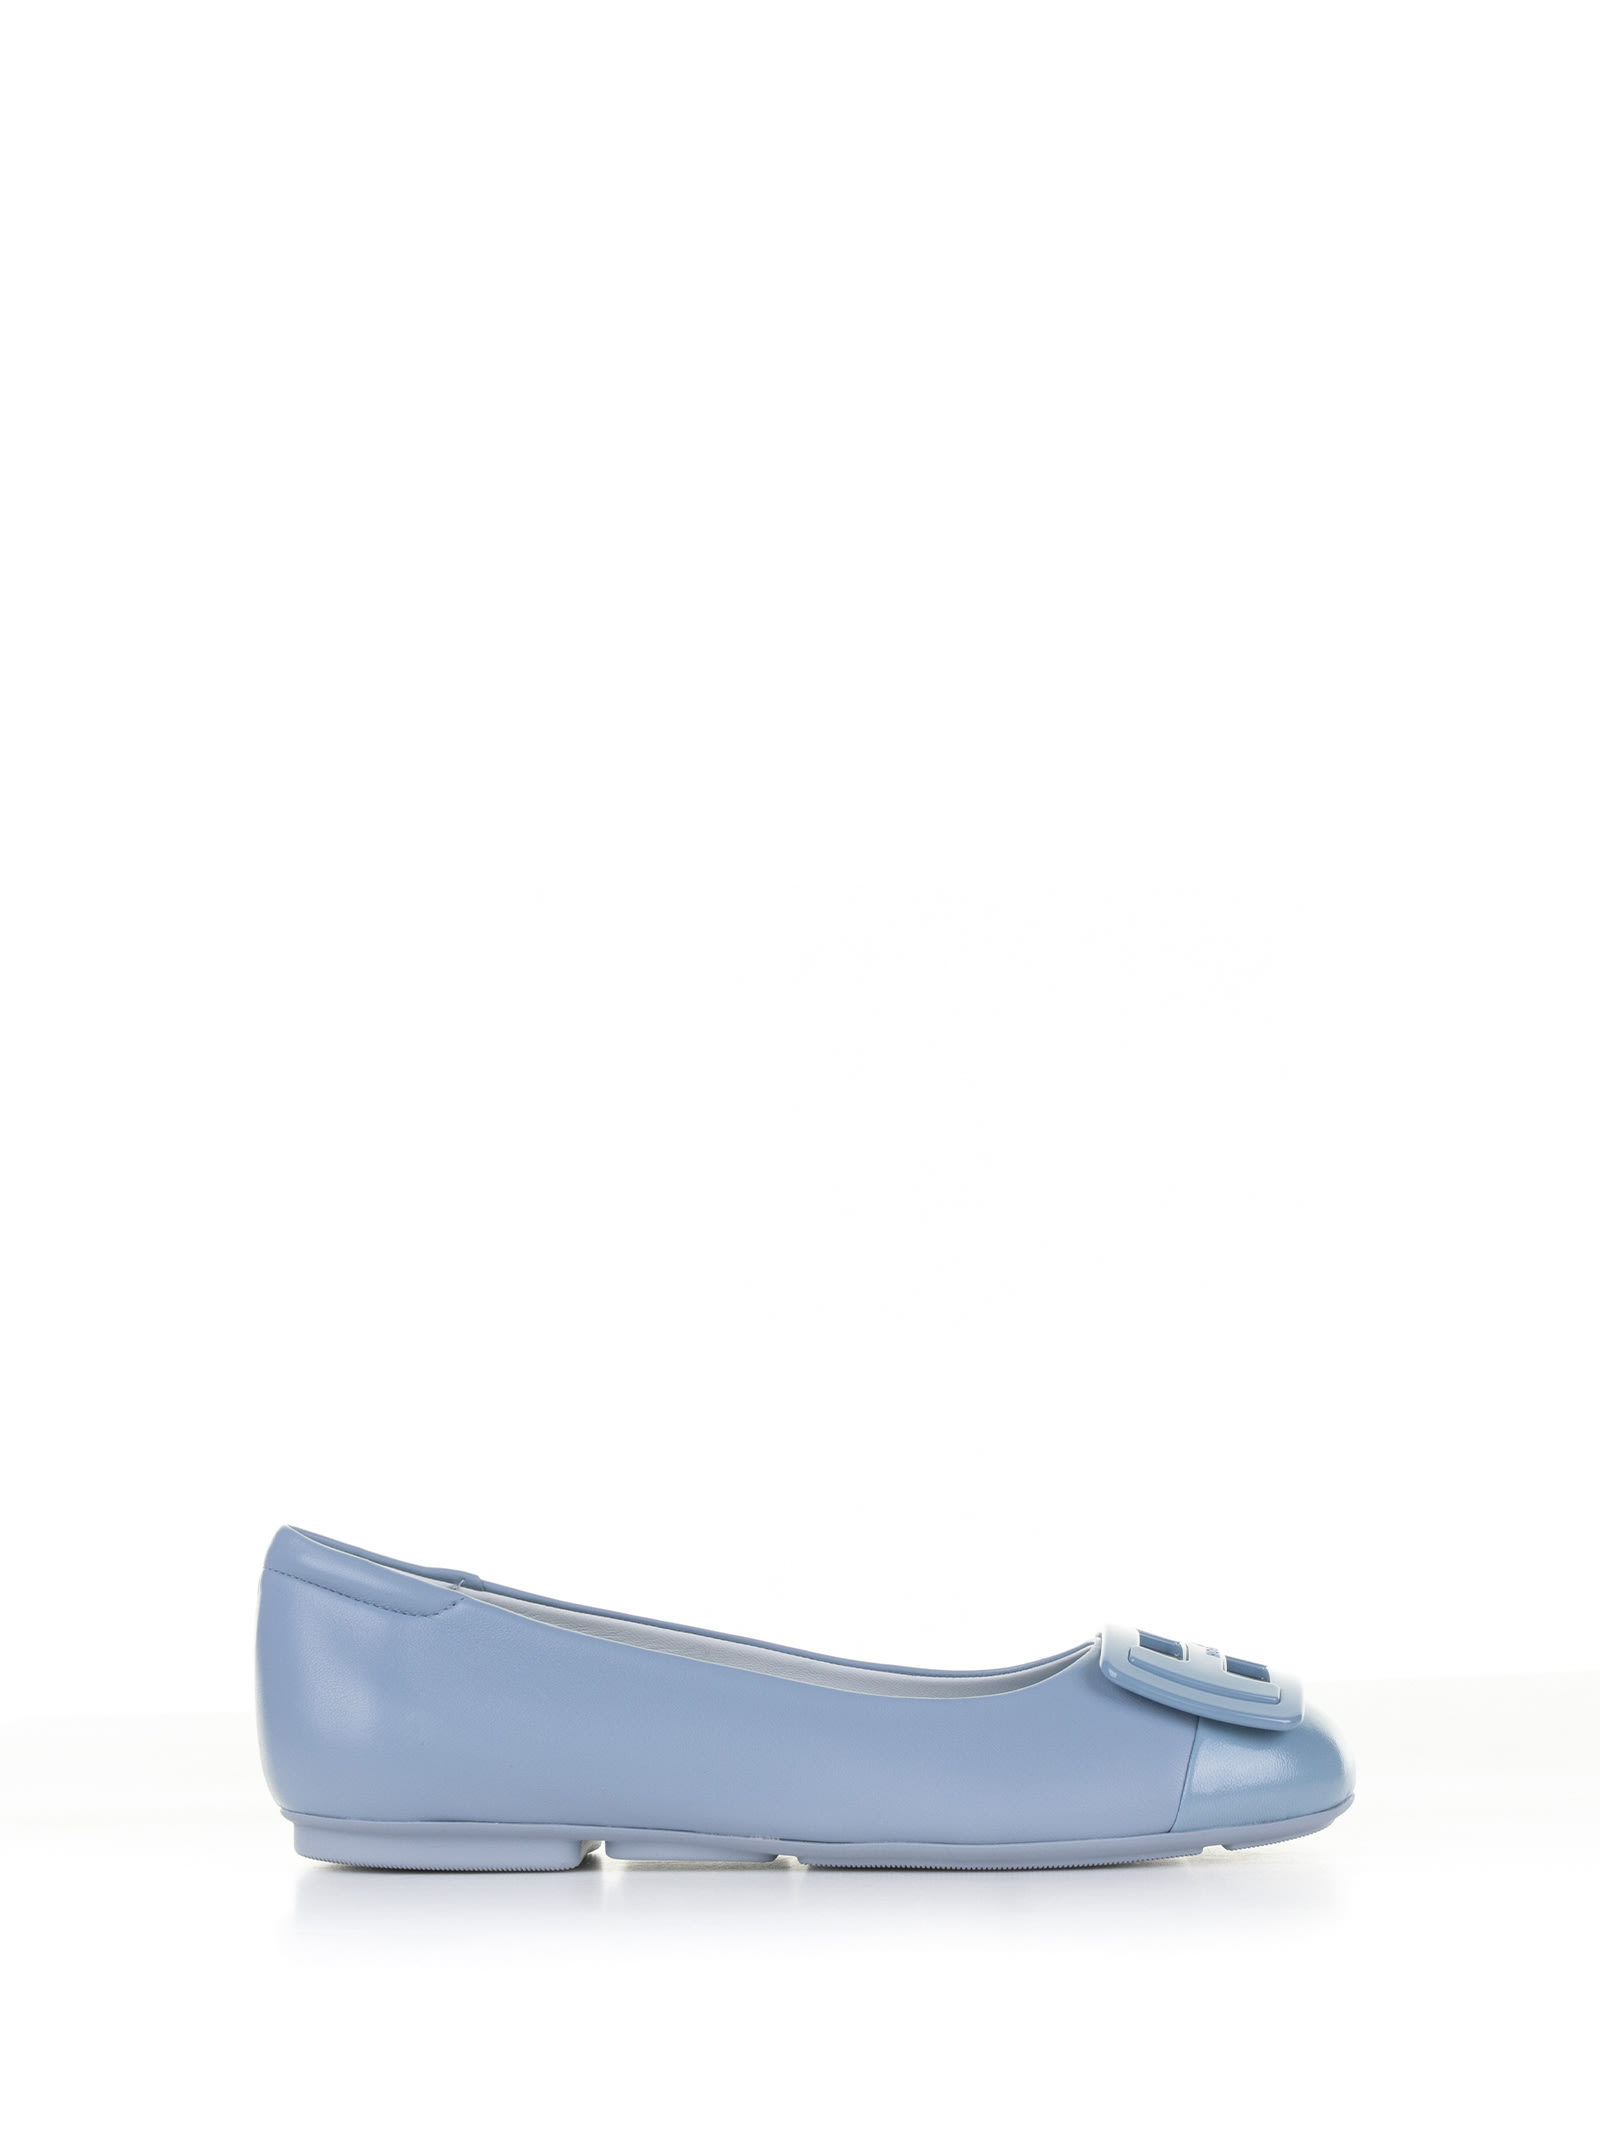 Hogan Ballerina H661 Light Blue With Patent Inserts In Ashley Blue